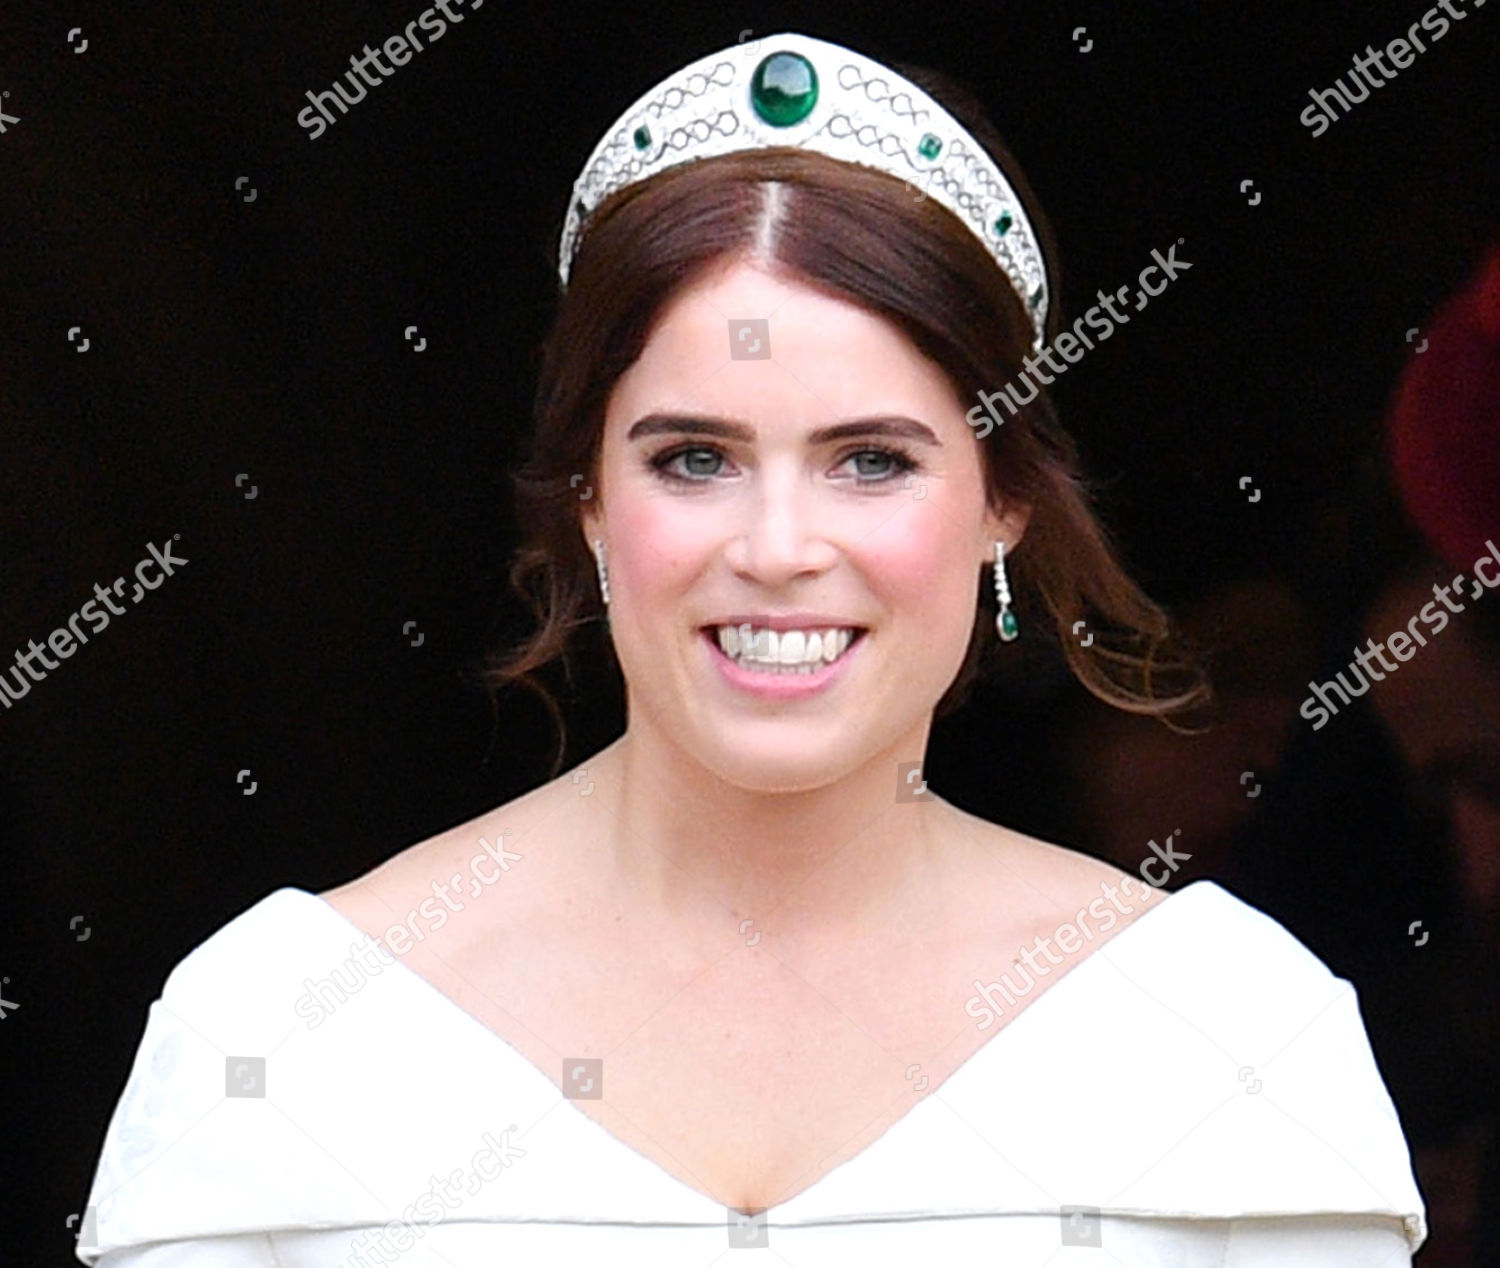 the-wedding-of-princess-eugenie-and-jack-brooksbank-carriage-procession-windsor-berkshire-uk-shutterstock-editorial-9927759ax.jpg